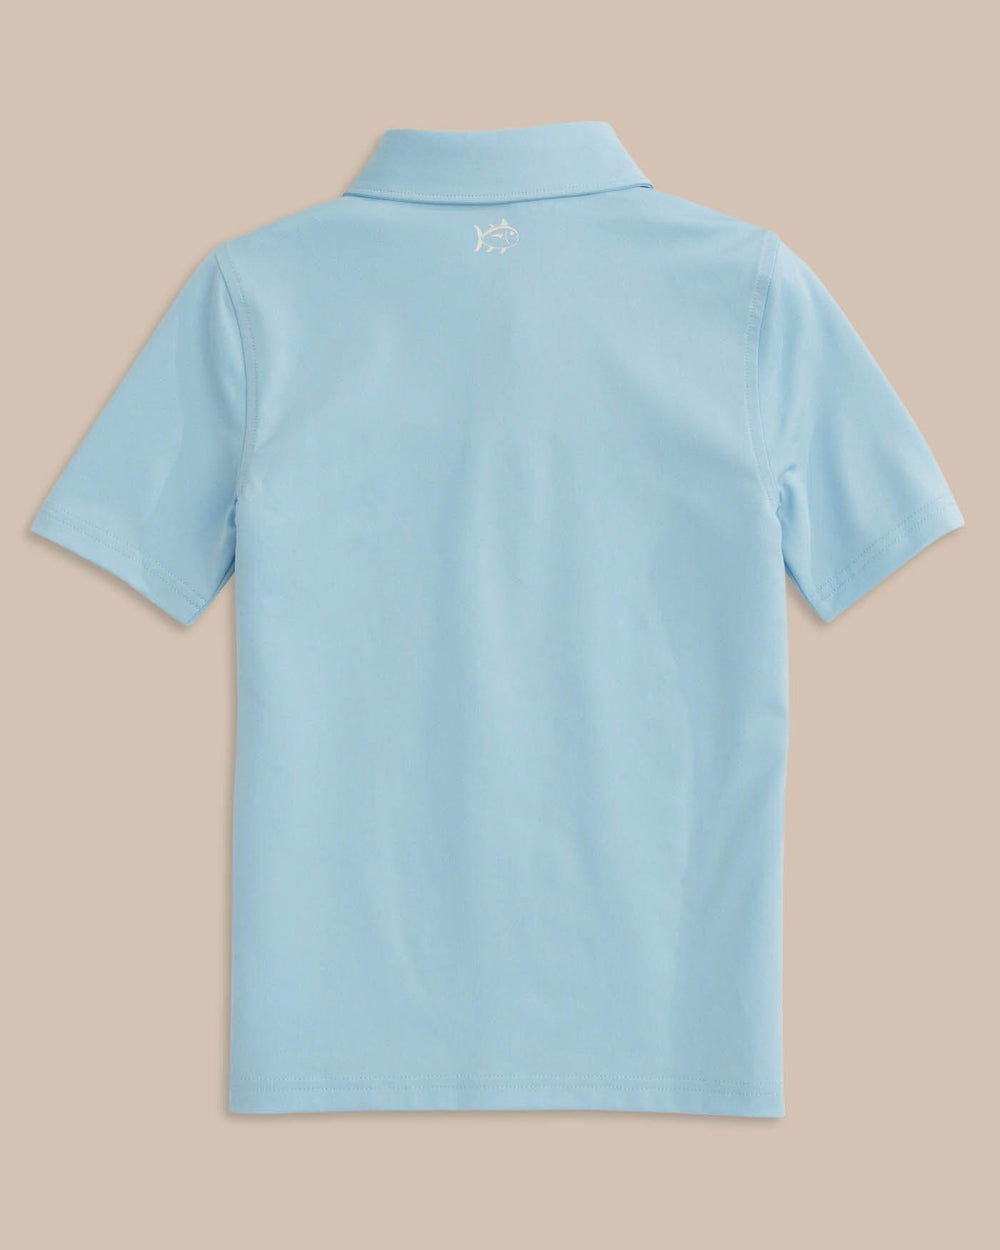 The back view of the Boys Driver Performance Polo Shirt by Southern Tide - Sky Blue